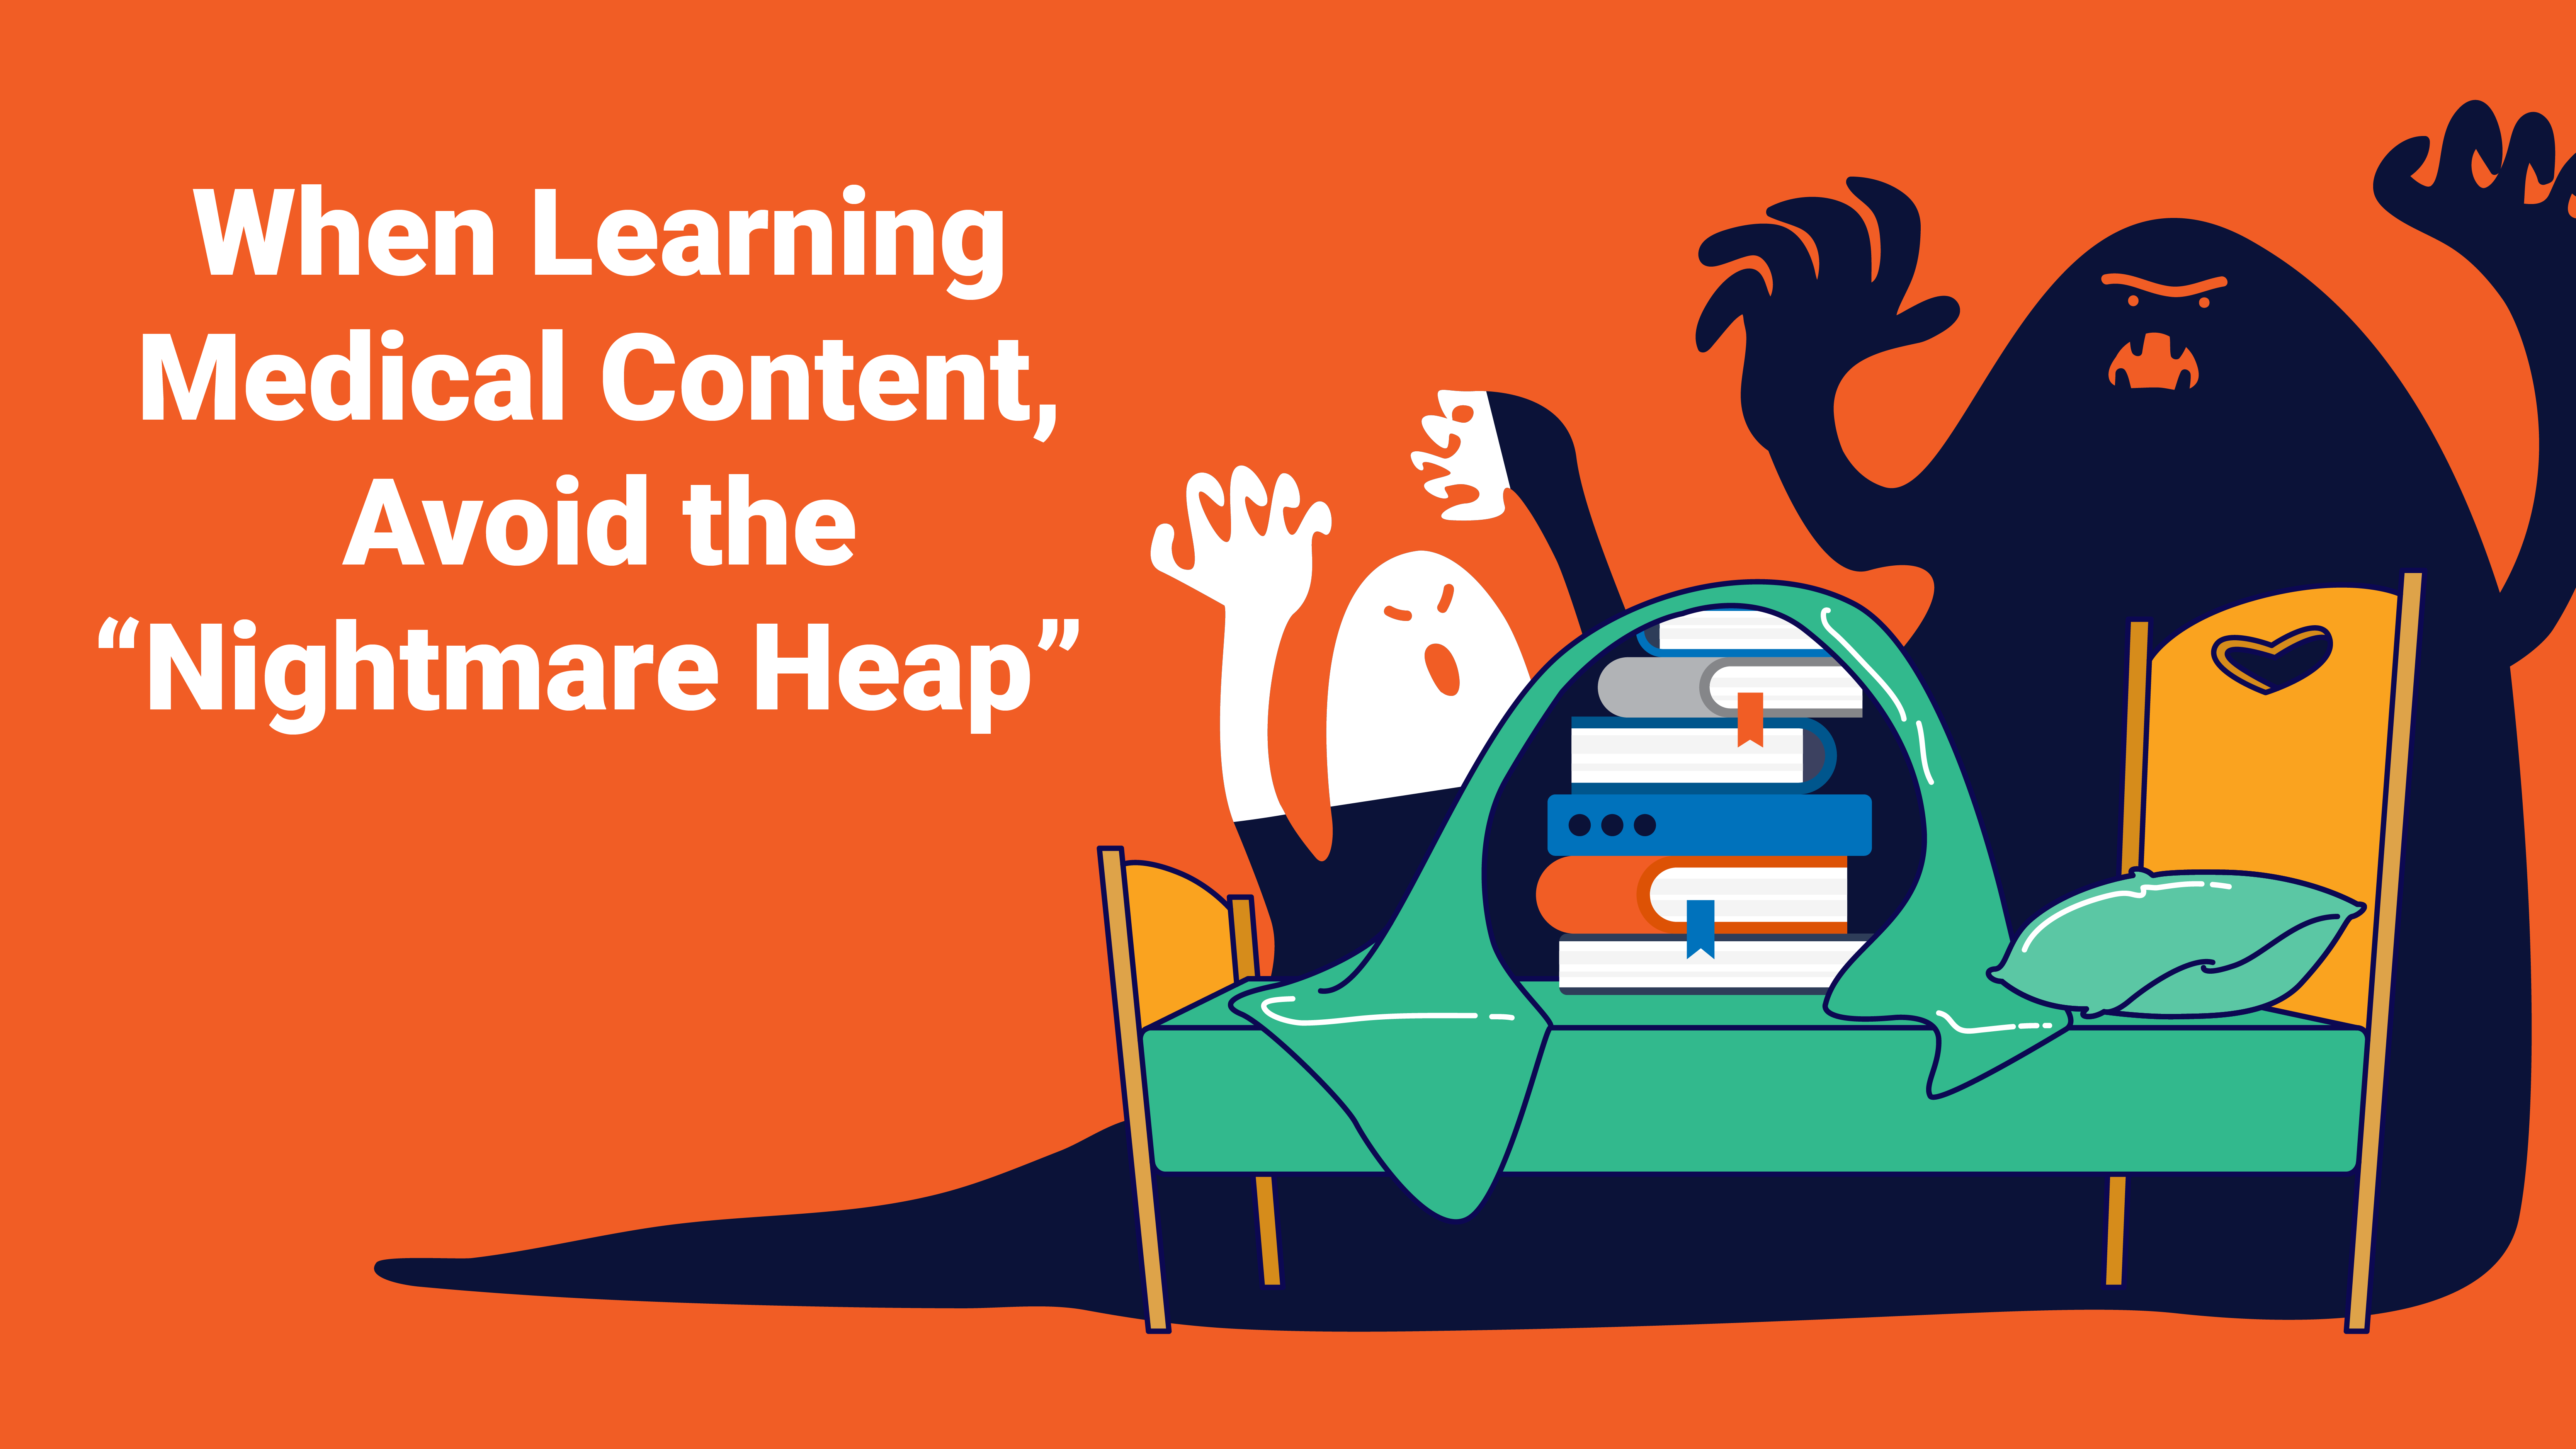 Featured image for “When Learning Medical Content, Avoid the “Nightmare Heap””